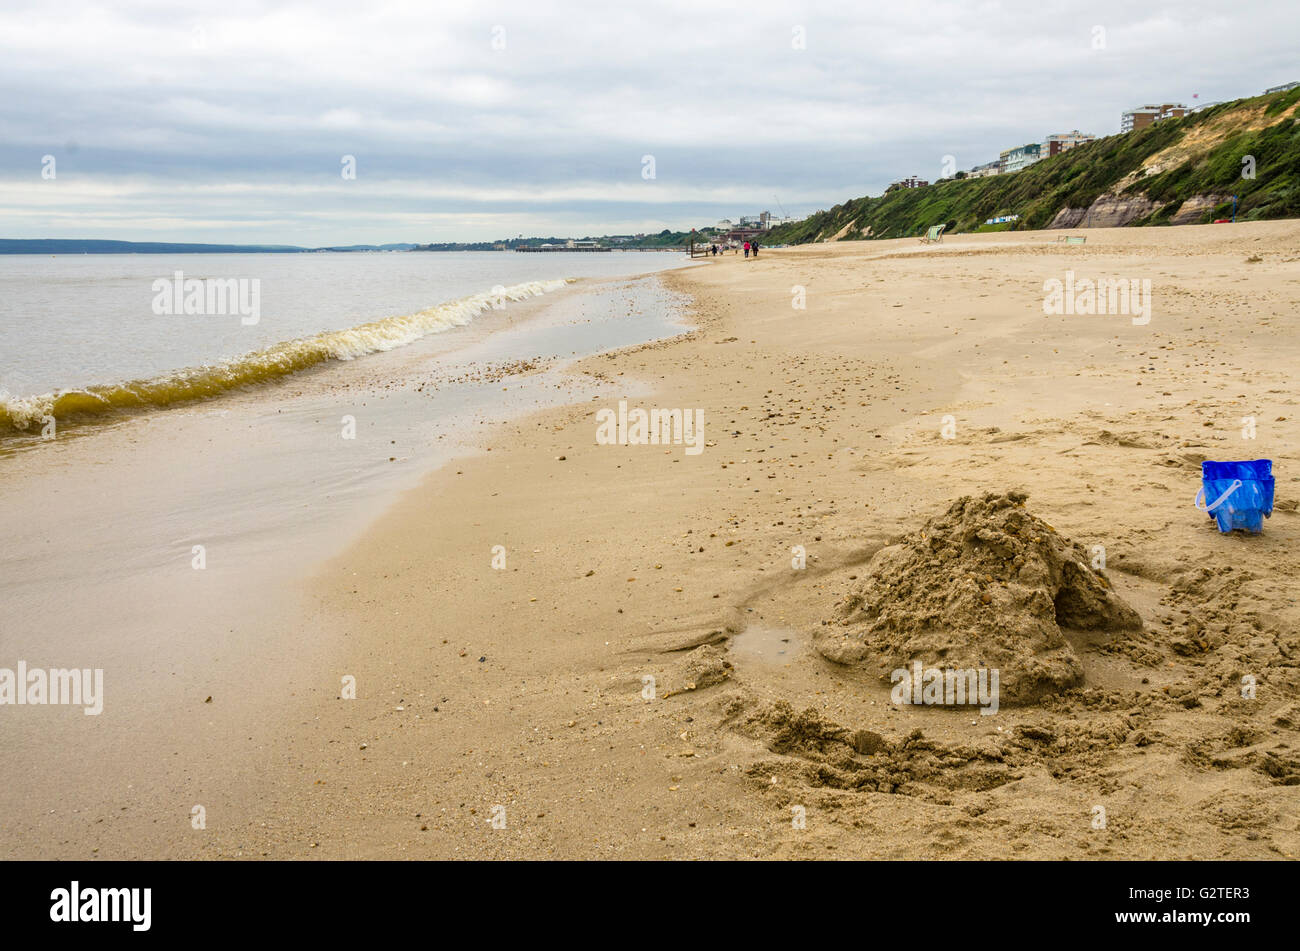 Looking long the water's edge on Boscombe Beach, Bournemouth, UK. Stock Photo